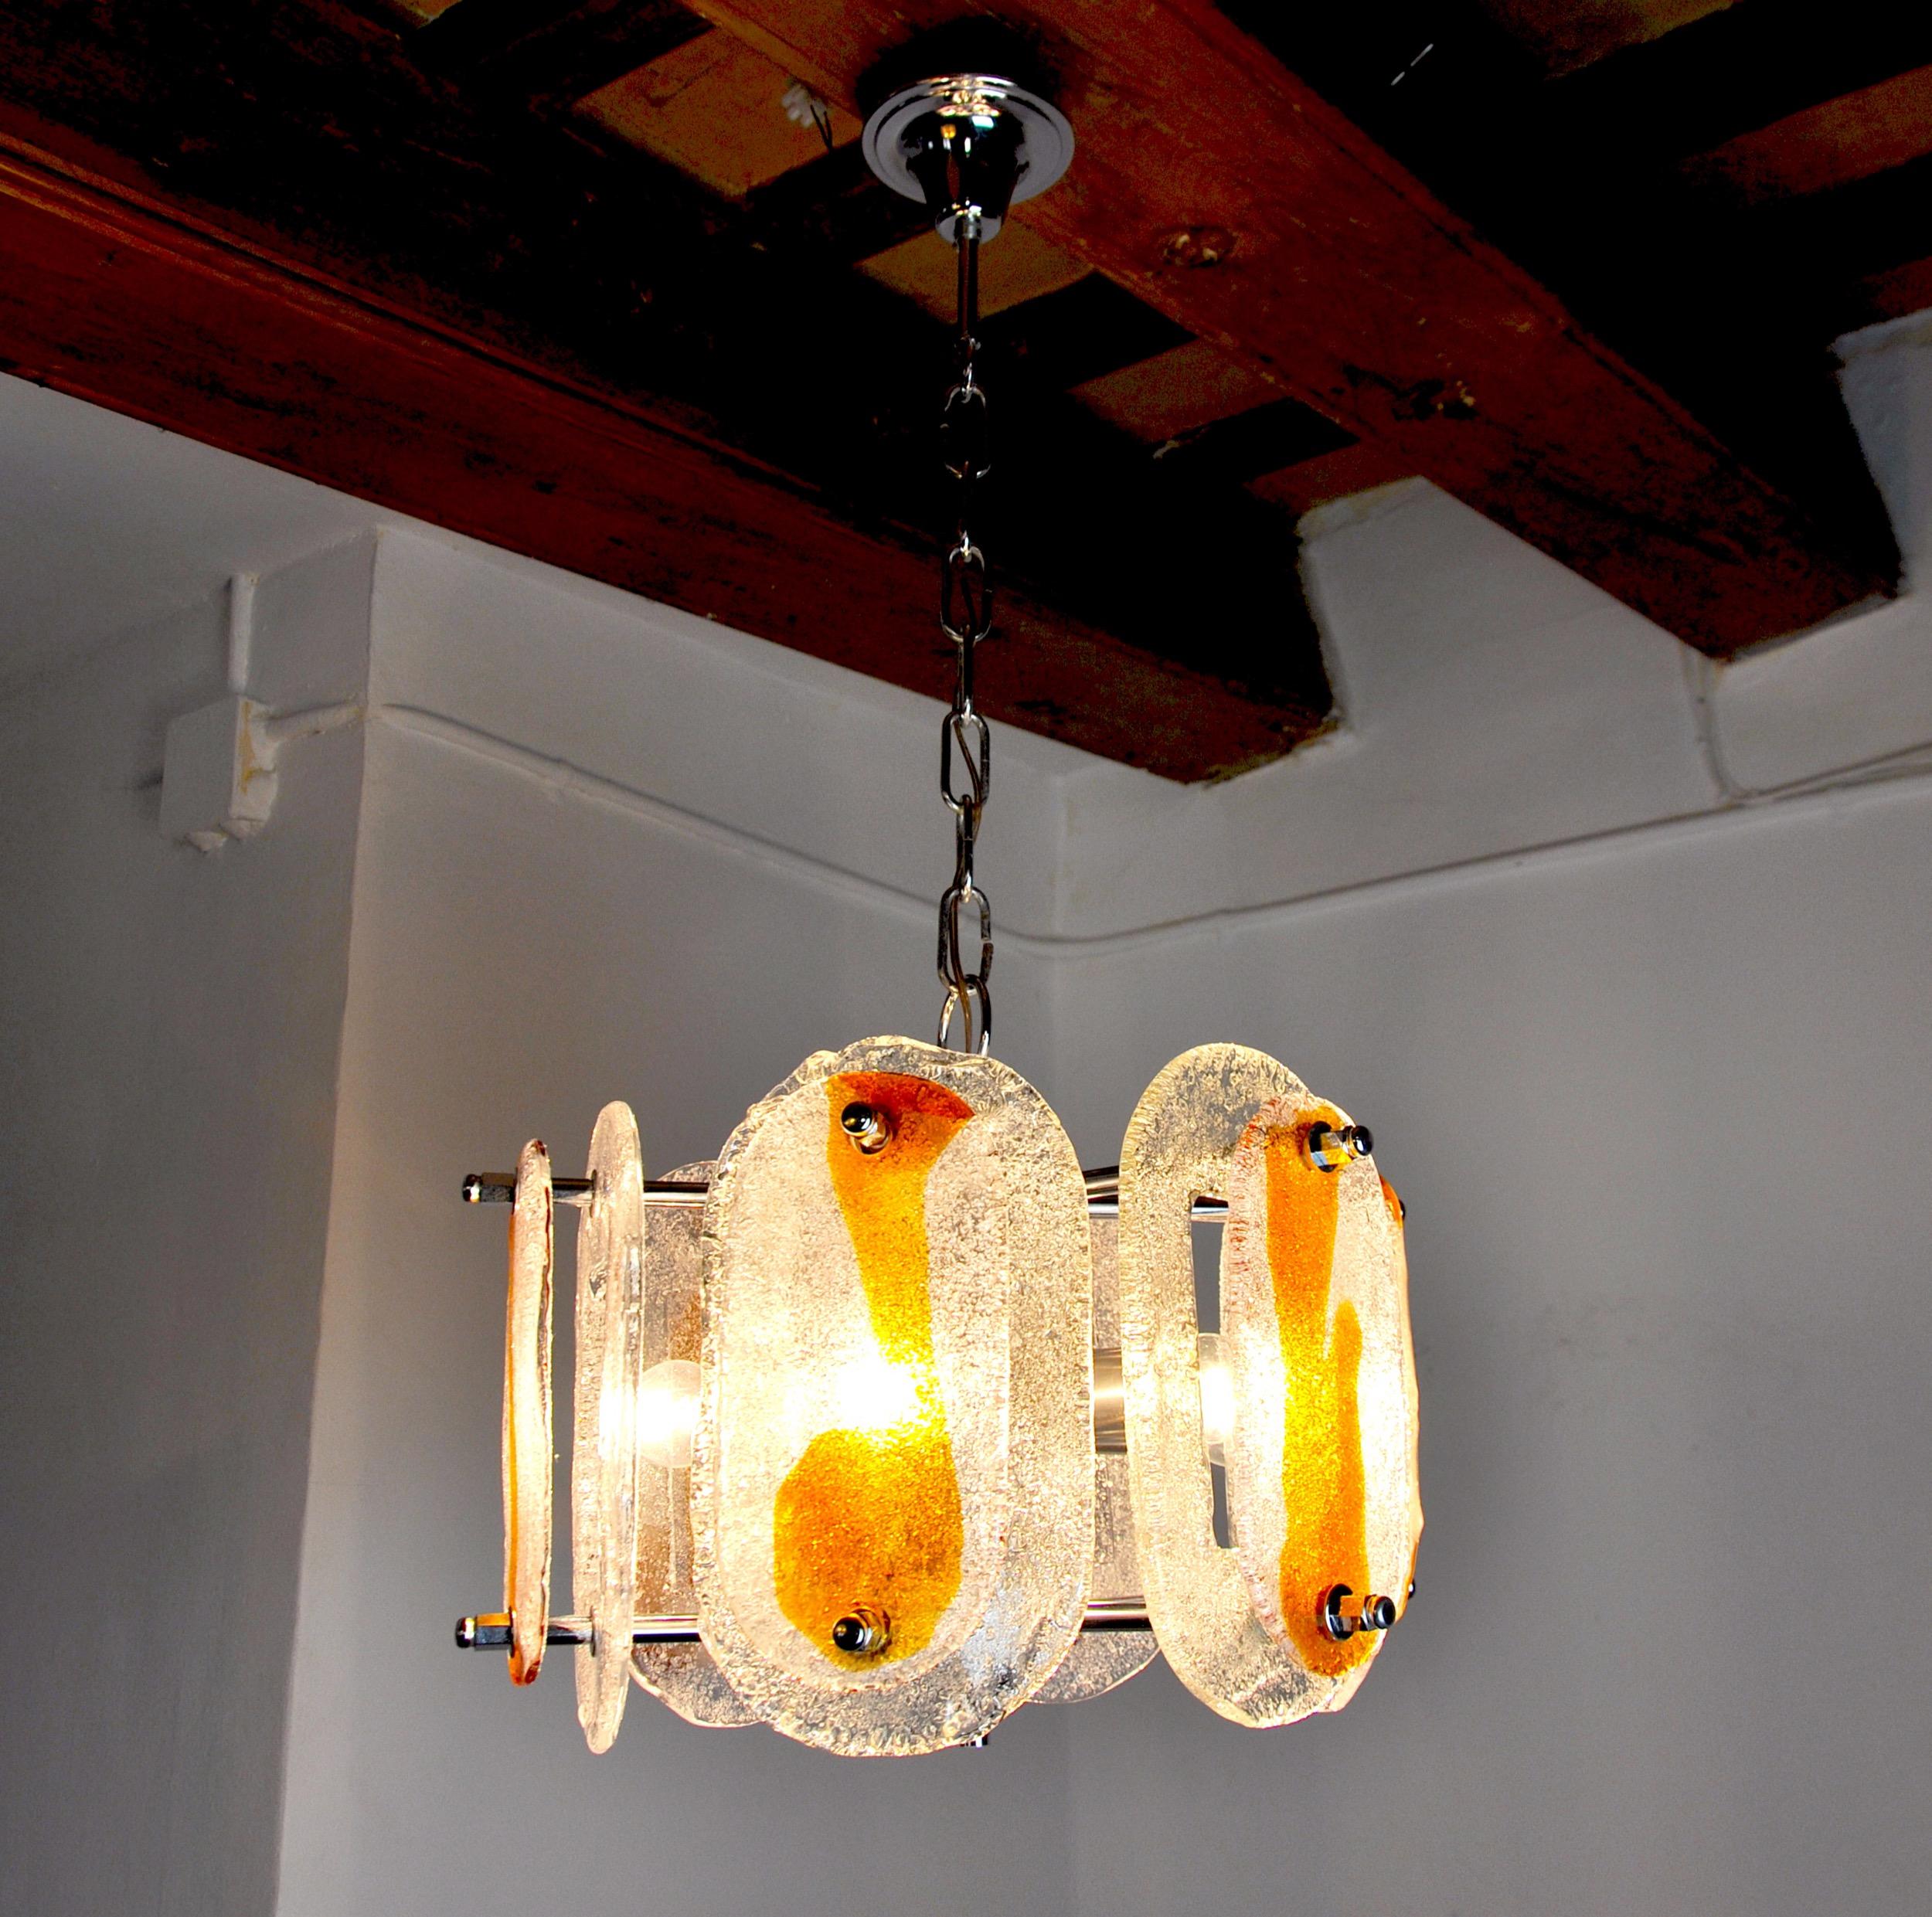 Superb and rare chandelier designed and produced by murano mazzega in italy in the 1970s.orange frosted murano crystals distributed on a chromed metal structure.

Rare design object that will illuminate your interior perfectly.

Electricity